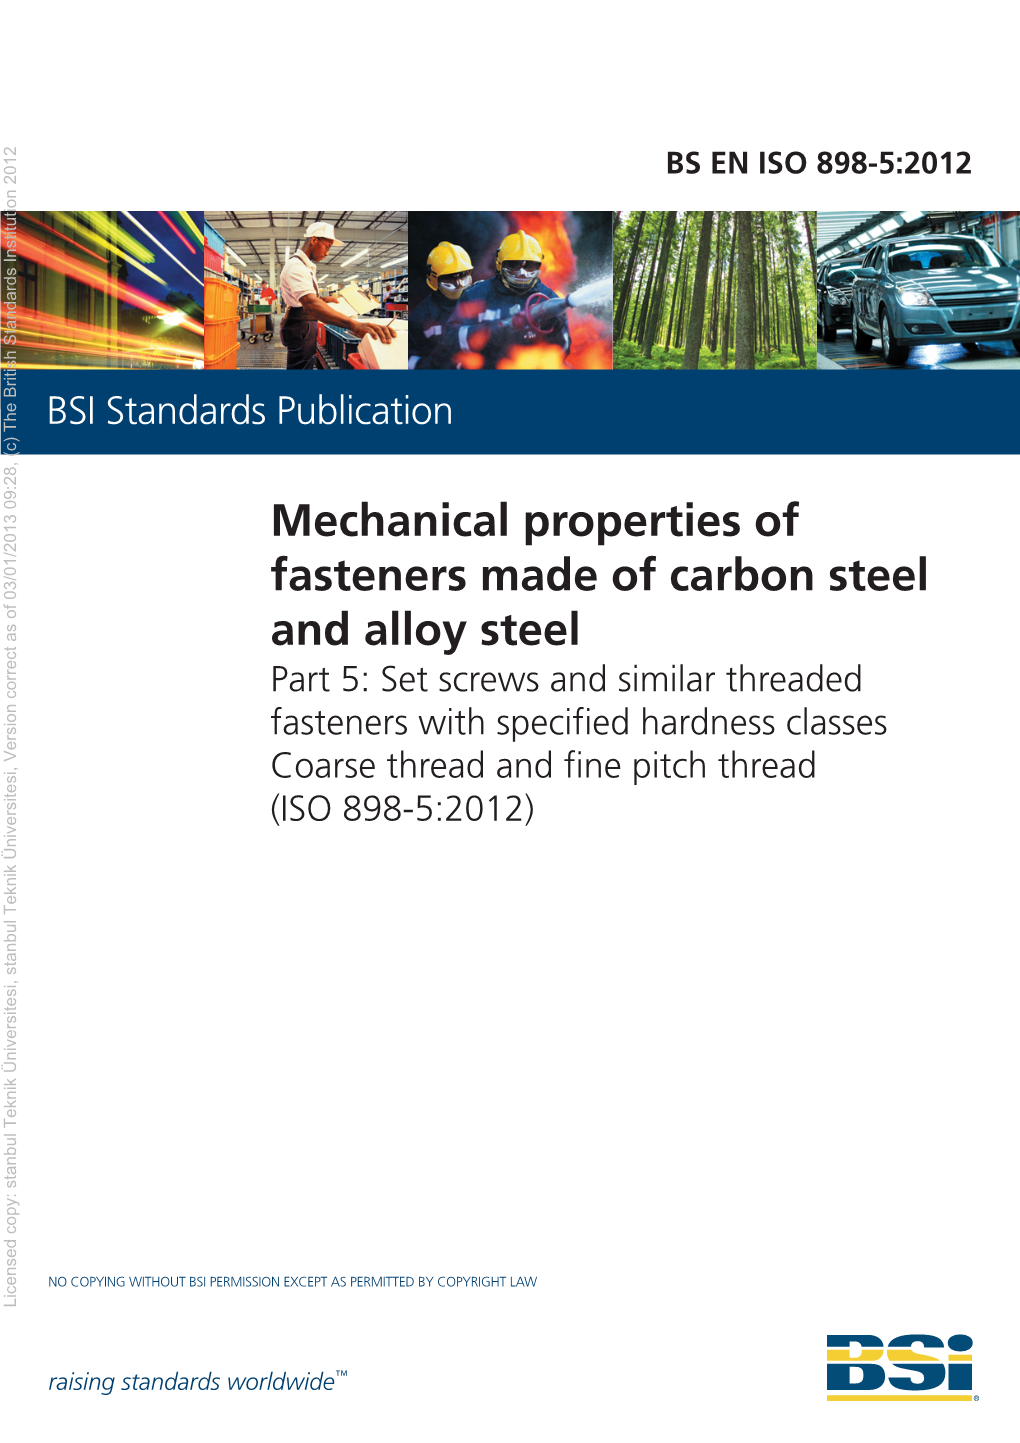 Mechanical Properties of Fasteners Made of Carbon Steel and Alloy Steel